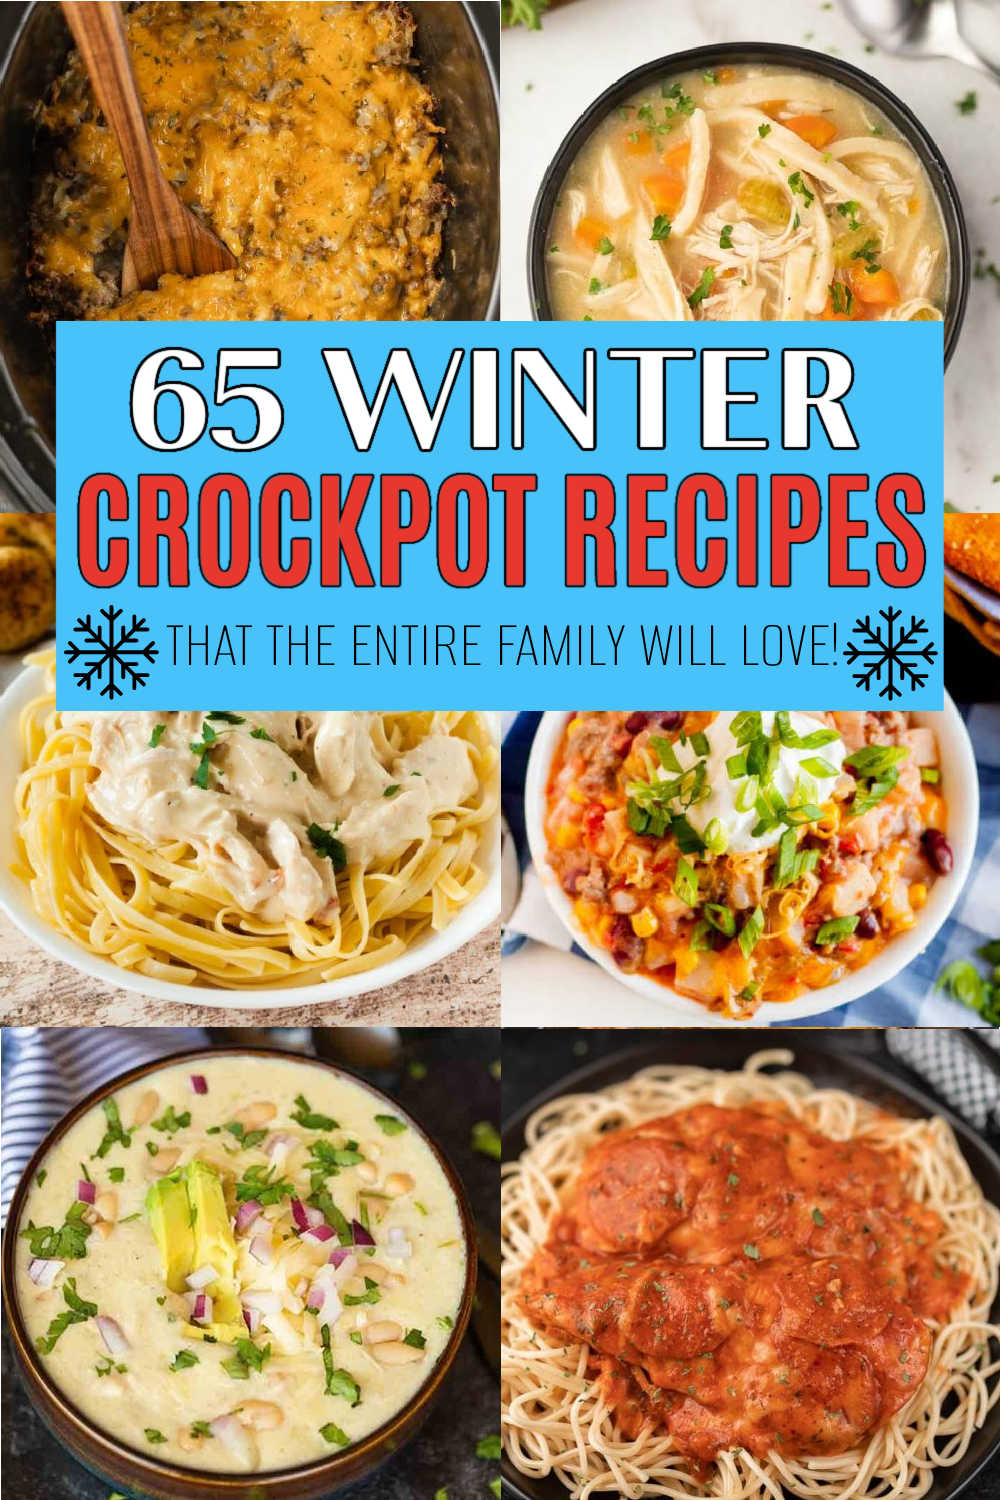 Crockpots, slow cookers on sale for easy winter meals 